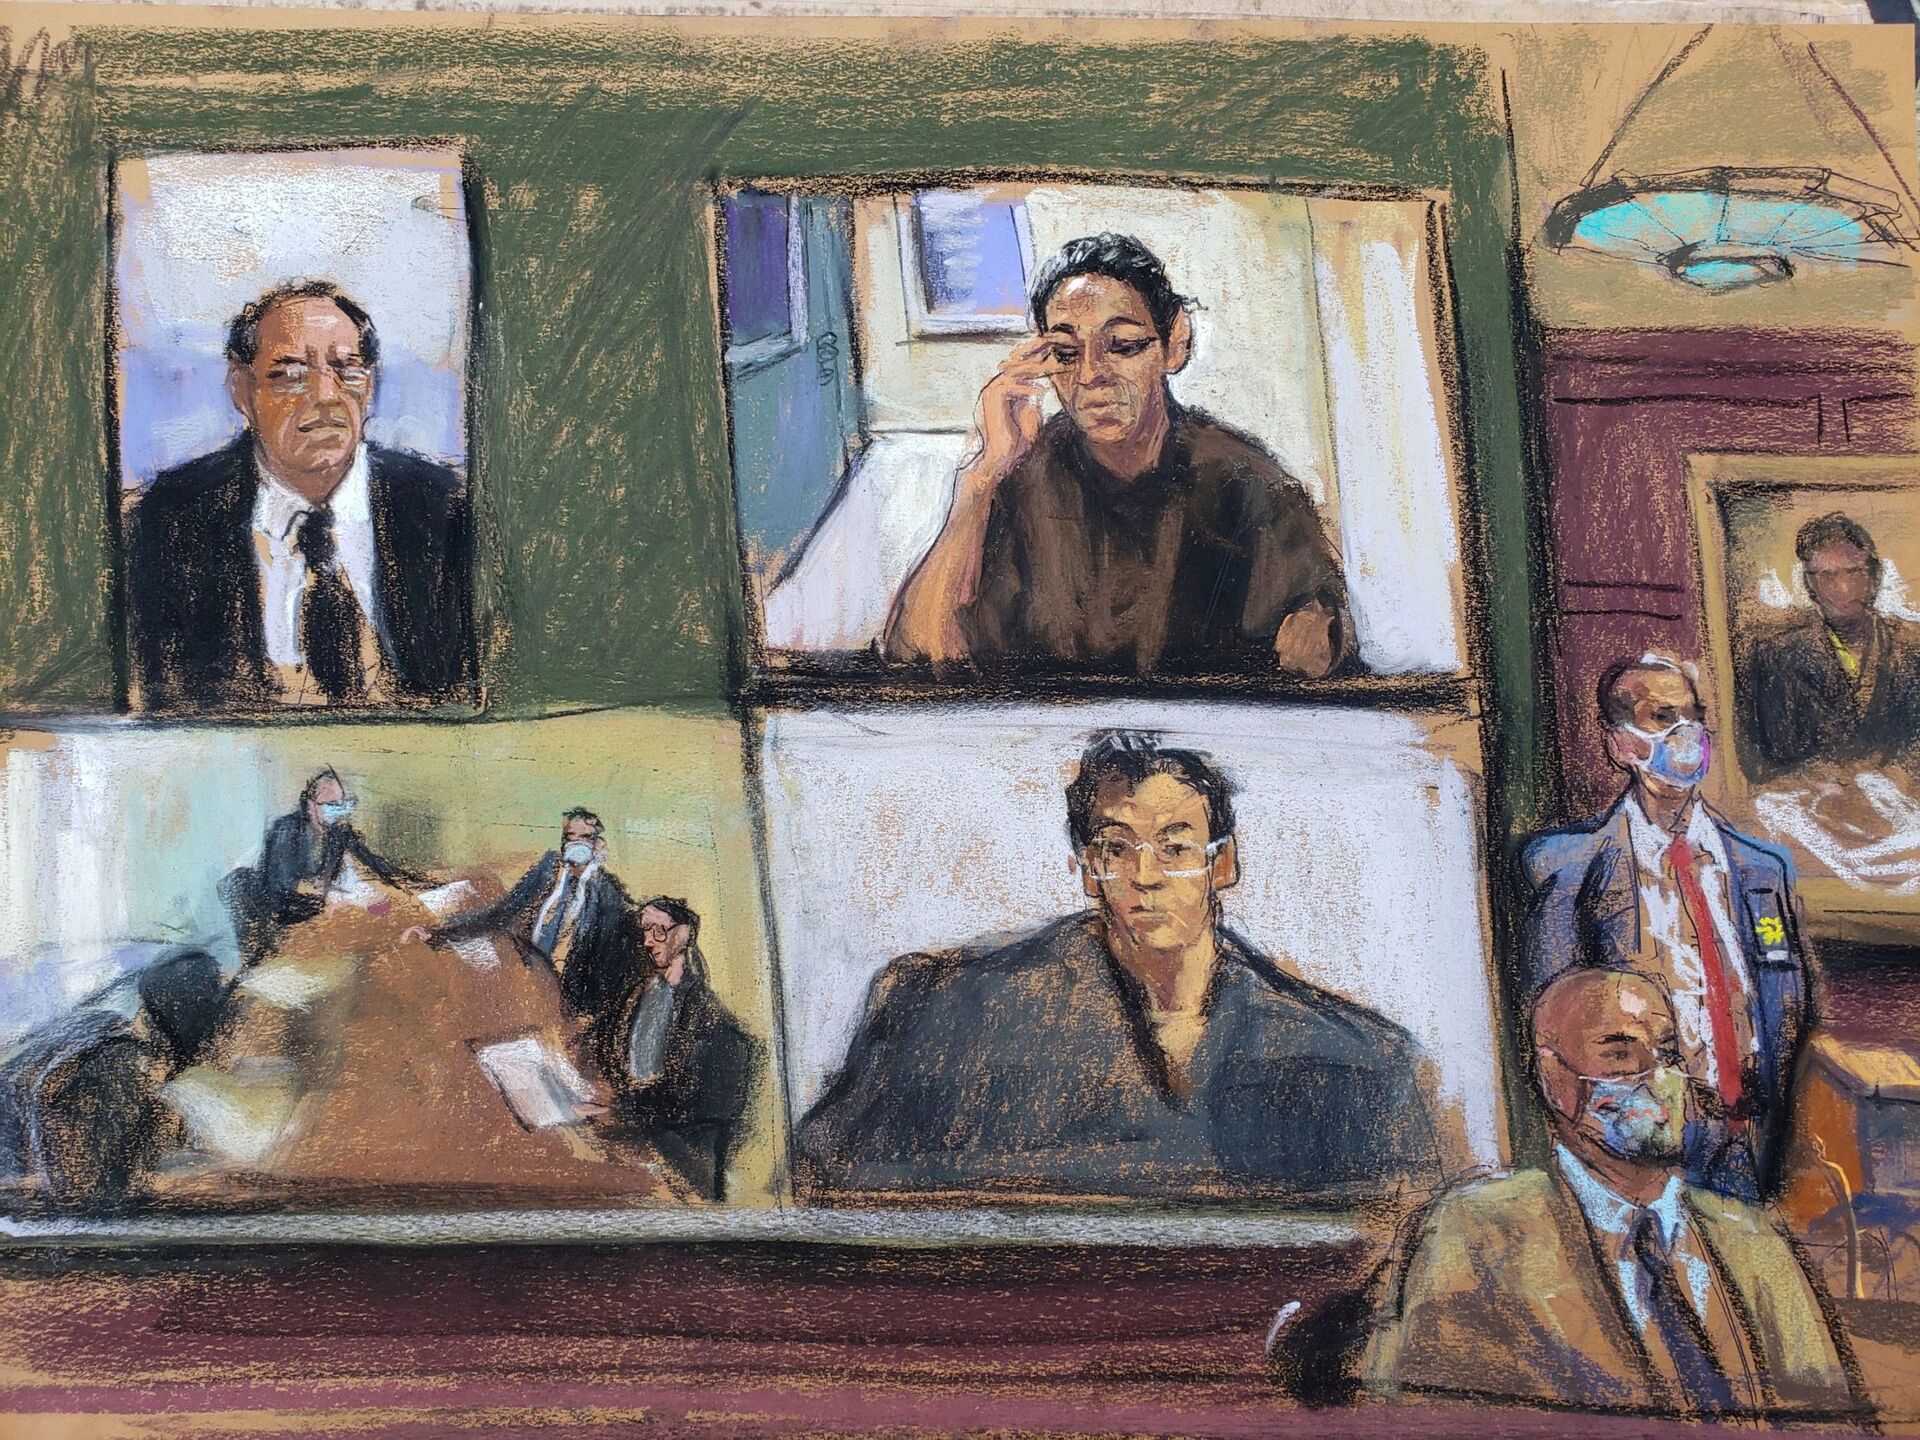 Ghislaine Maxwell appears via video link during her arraignment hearing where she was denied bail for her role aiding Jeffrey Epstein to recruit and eventually abuse of minor girls, in Manhattan Federal Court, in the Manhattan borough of New York City, New York, U.S. July 14, 2020 in this courtroom sketch - Sputnik International, 1920, 07.09.2021